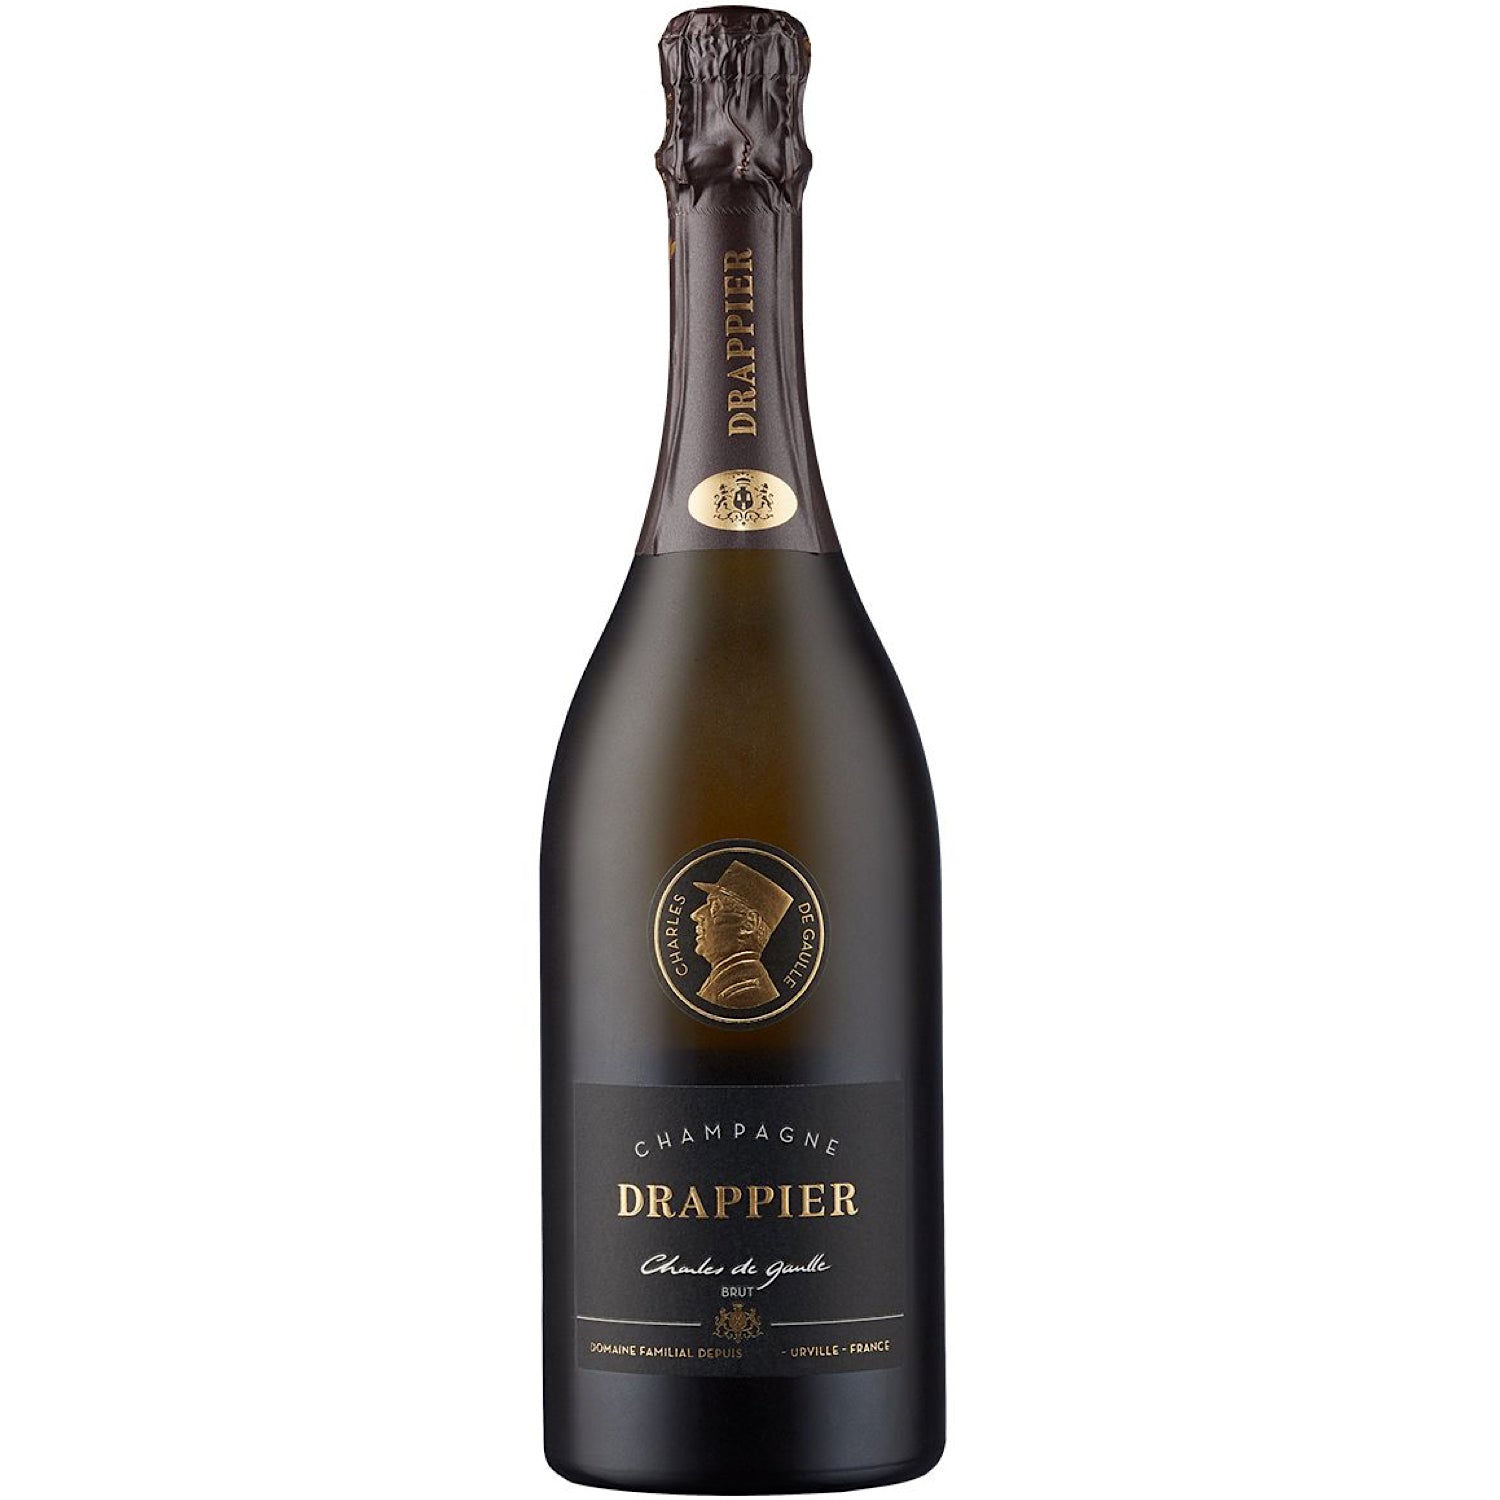 Champagne Drappier Charles de Gaulle [750ml]